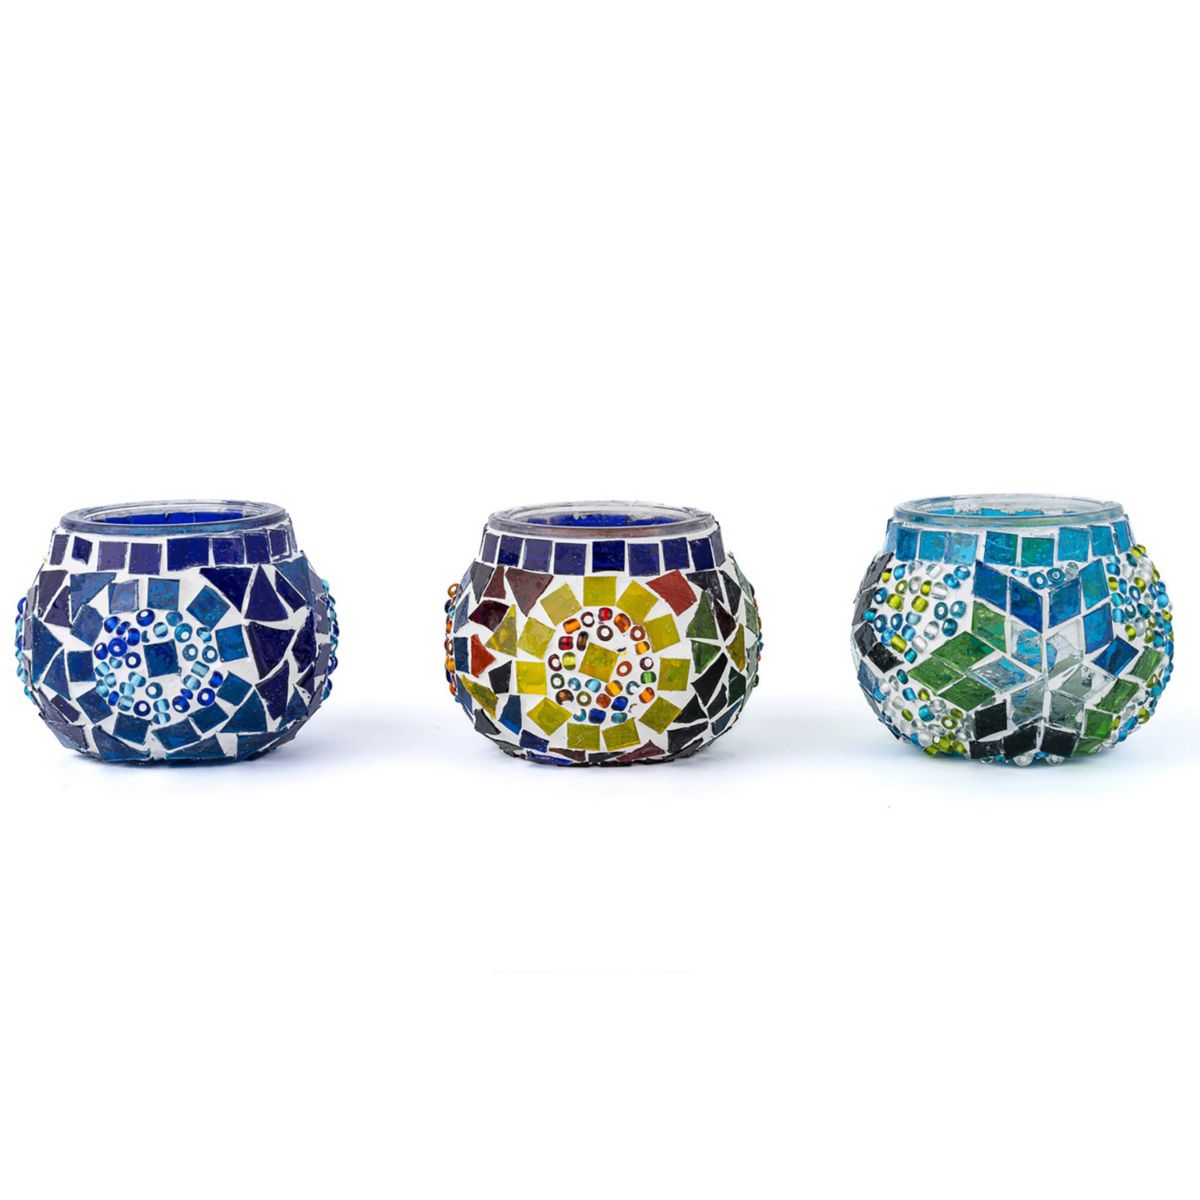 2.4 in. Handmade Blue and Turquoise and Multicolor Mosaic Glass Tealight Candle Holder (Set of 3) Kafthan